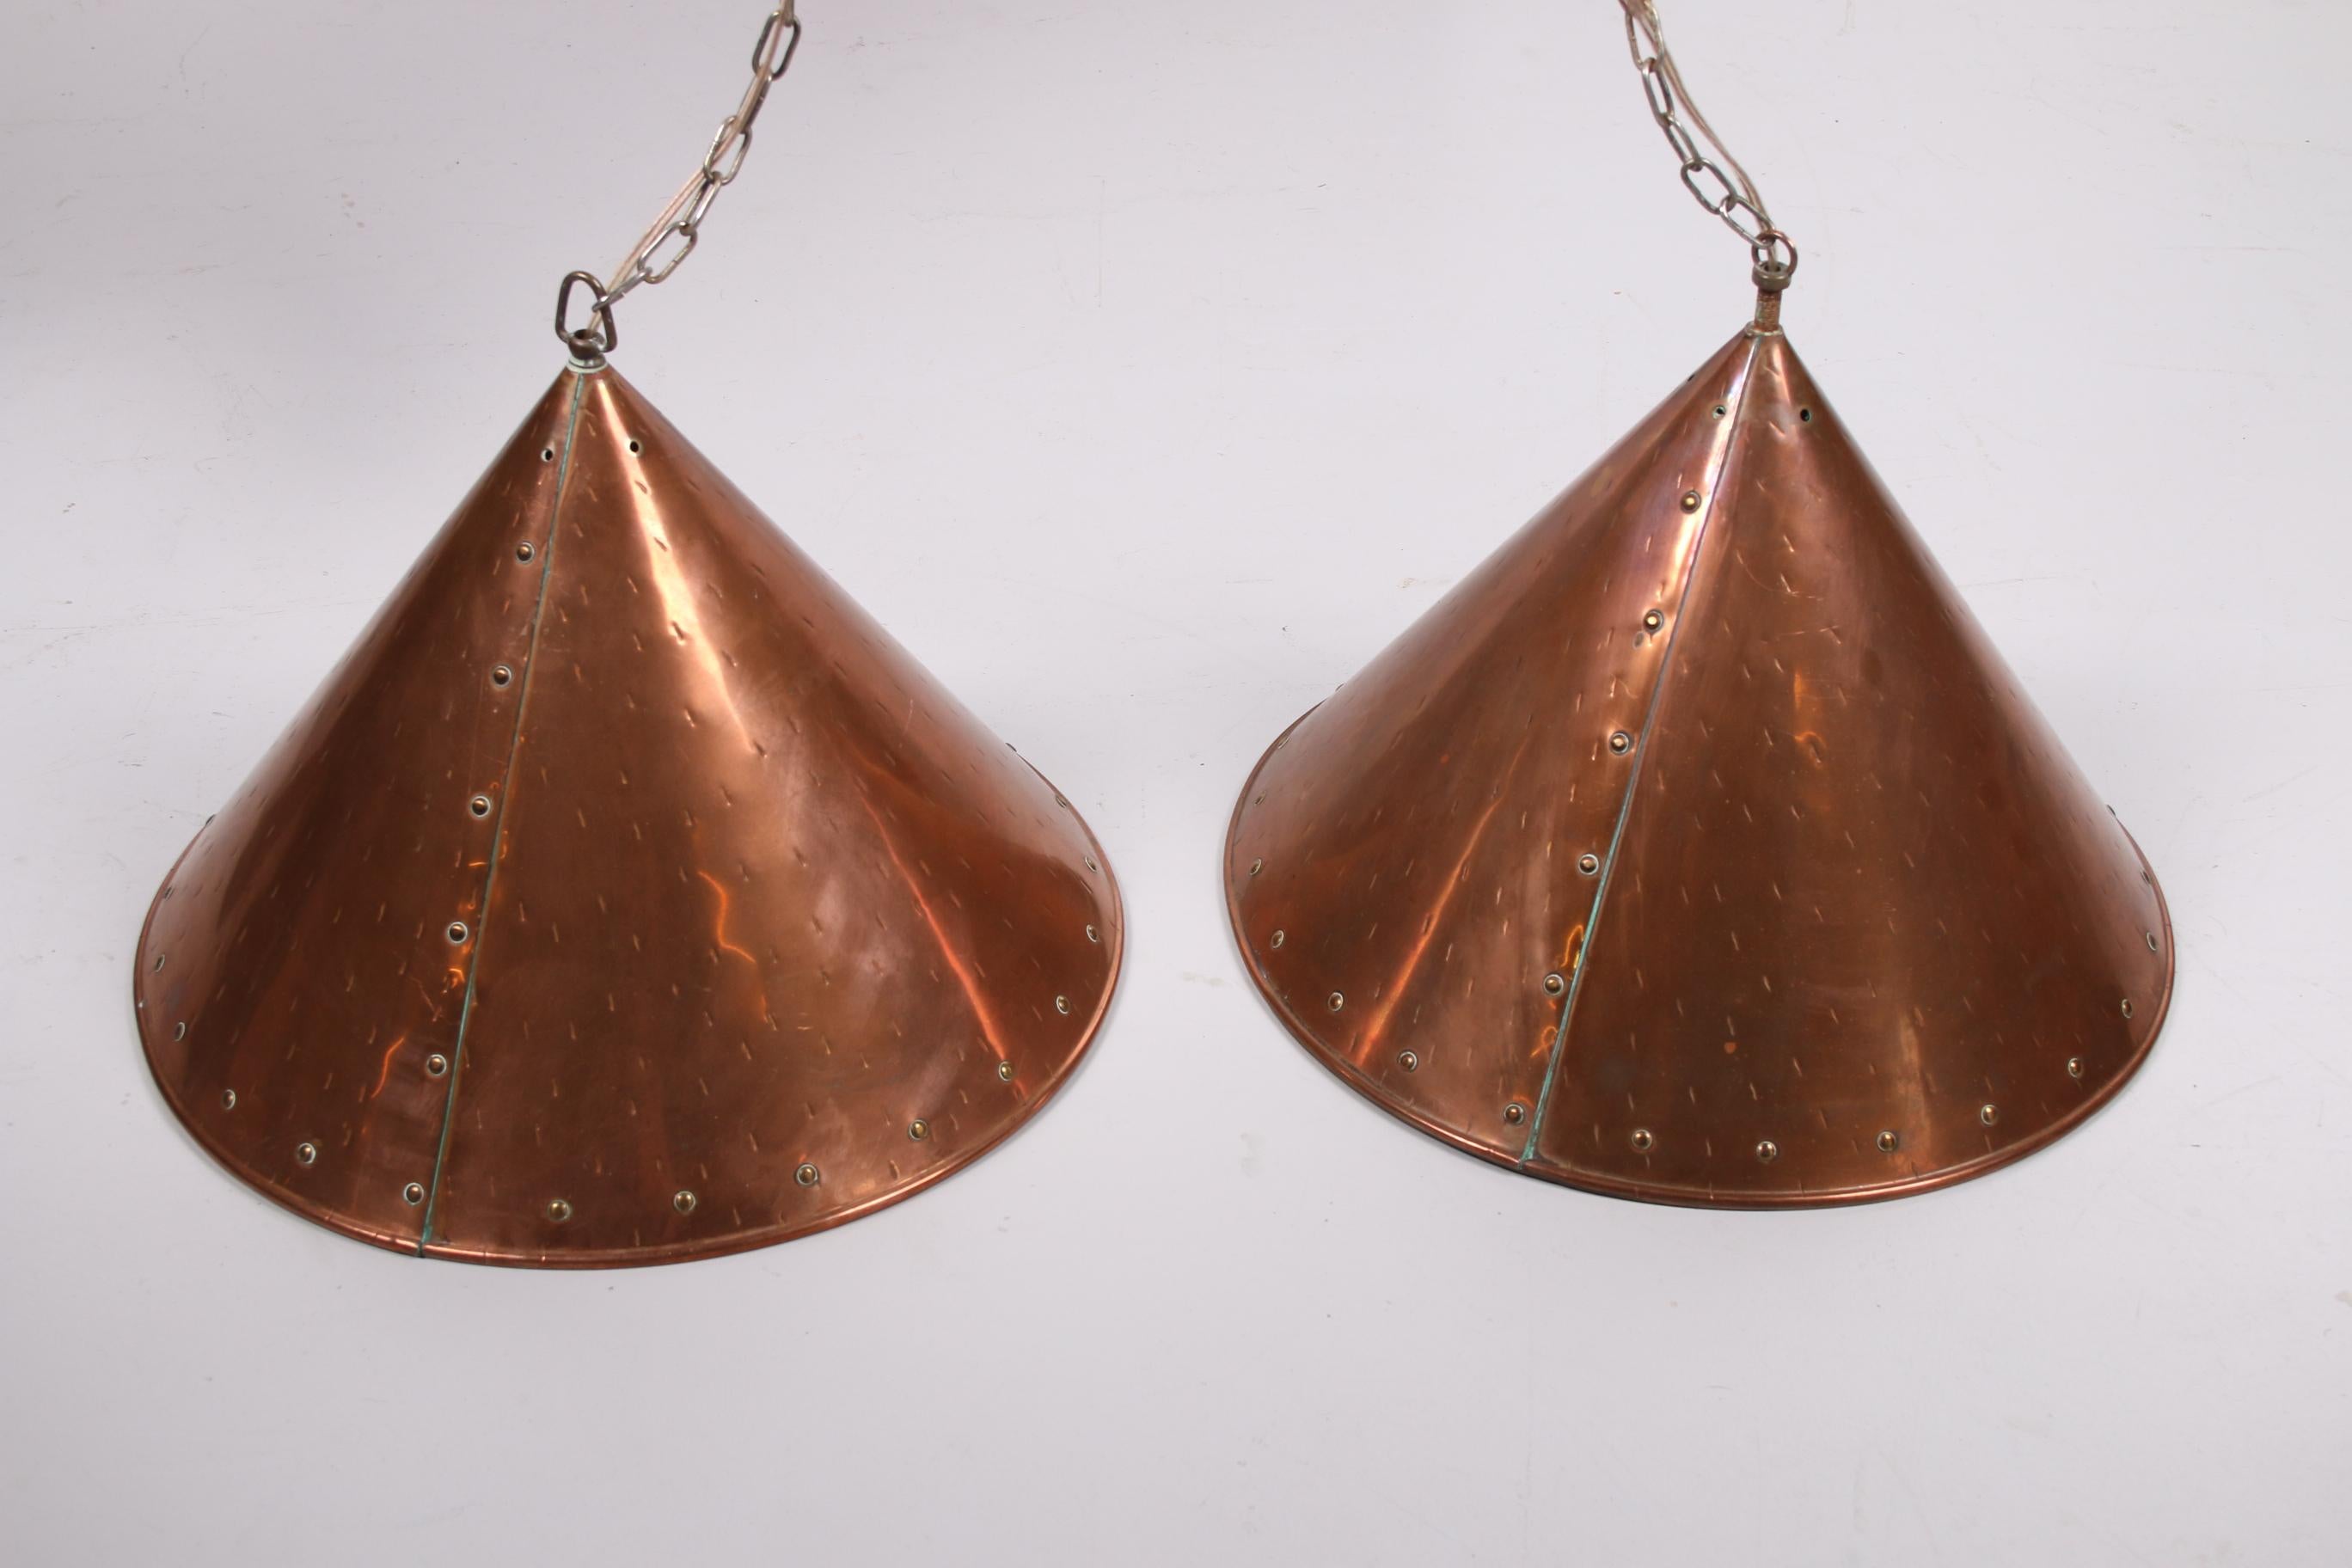 Mid-20th Century Danish Hand Hammered Copper Pendant Lamps by ES Horn Aalestrup, 1950s For Sale